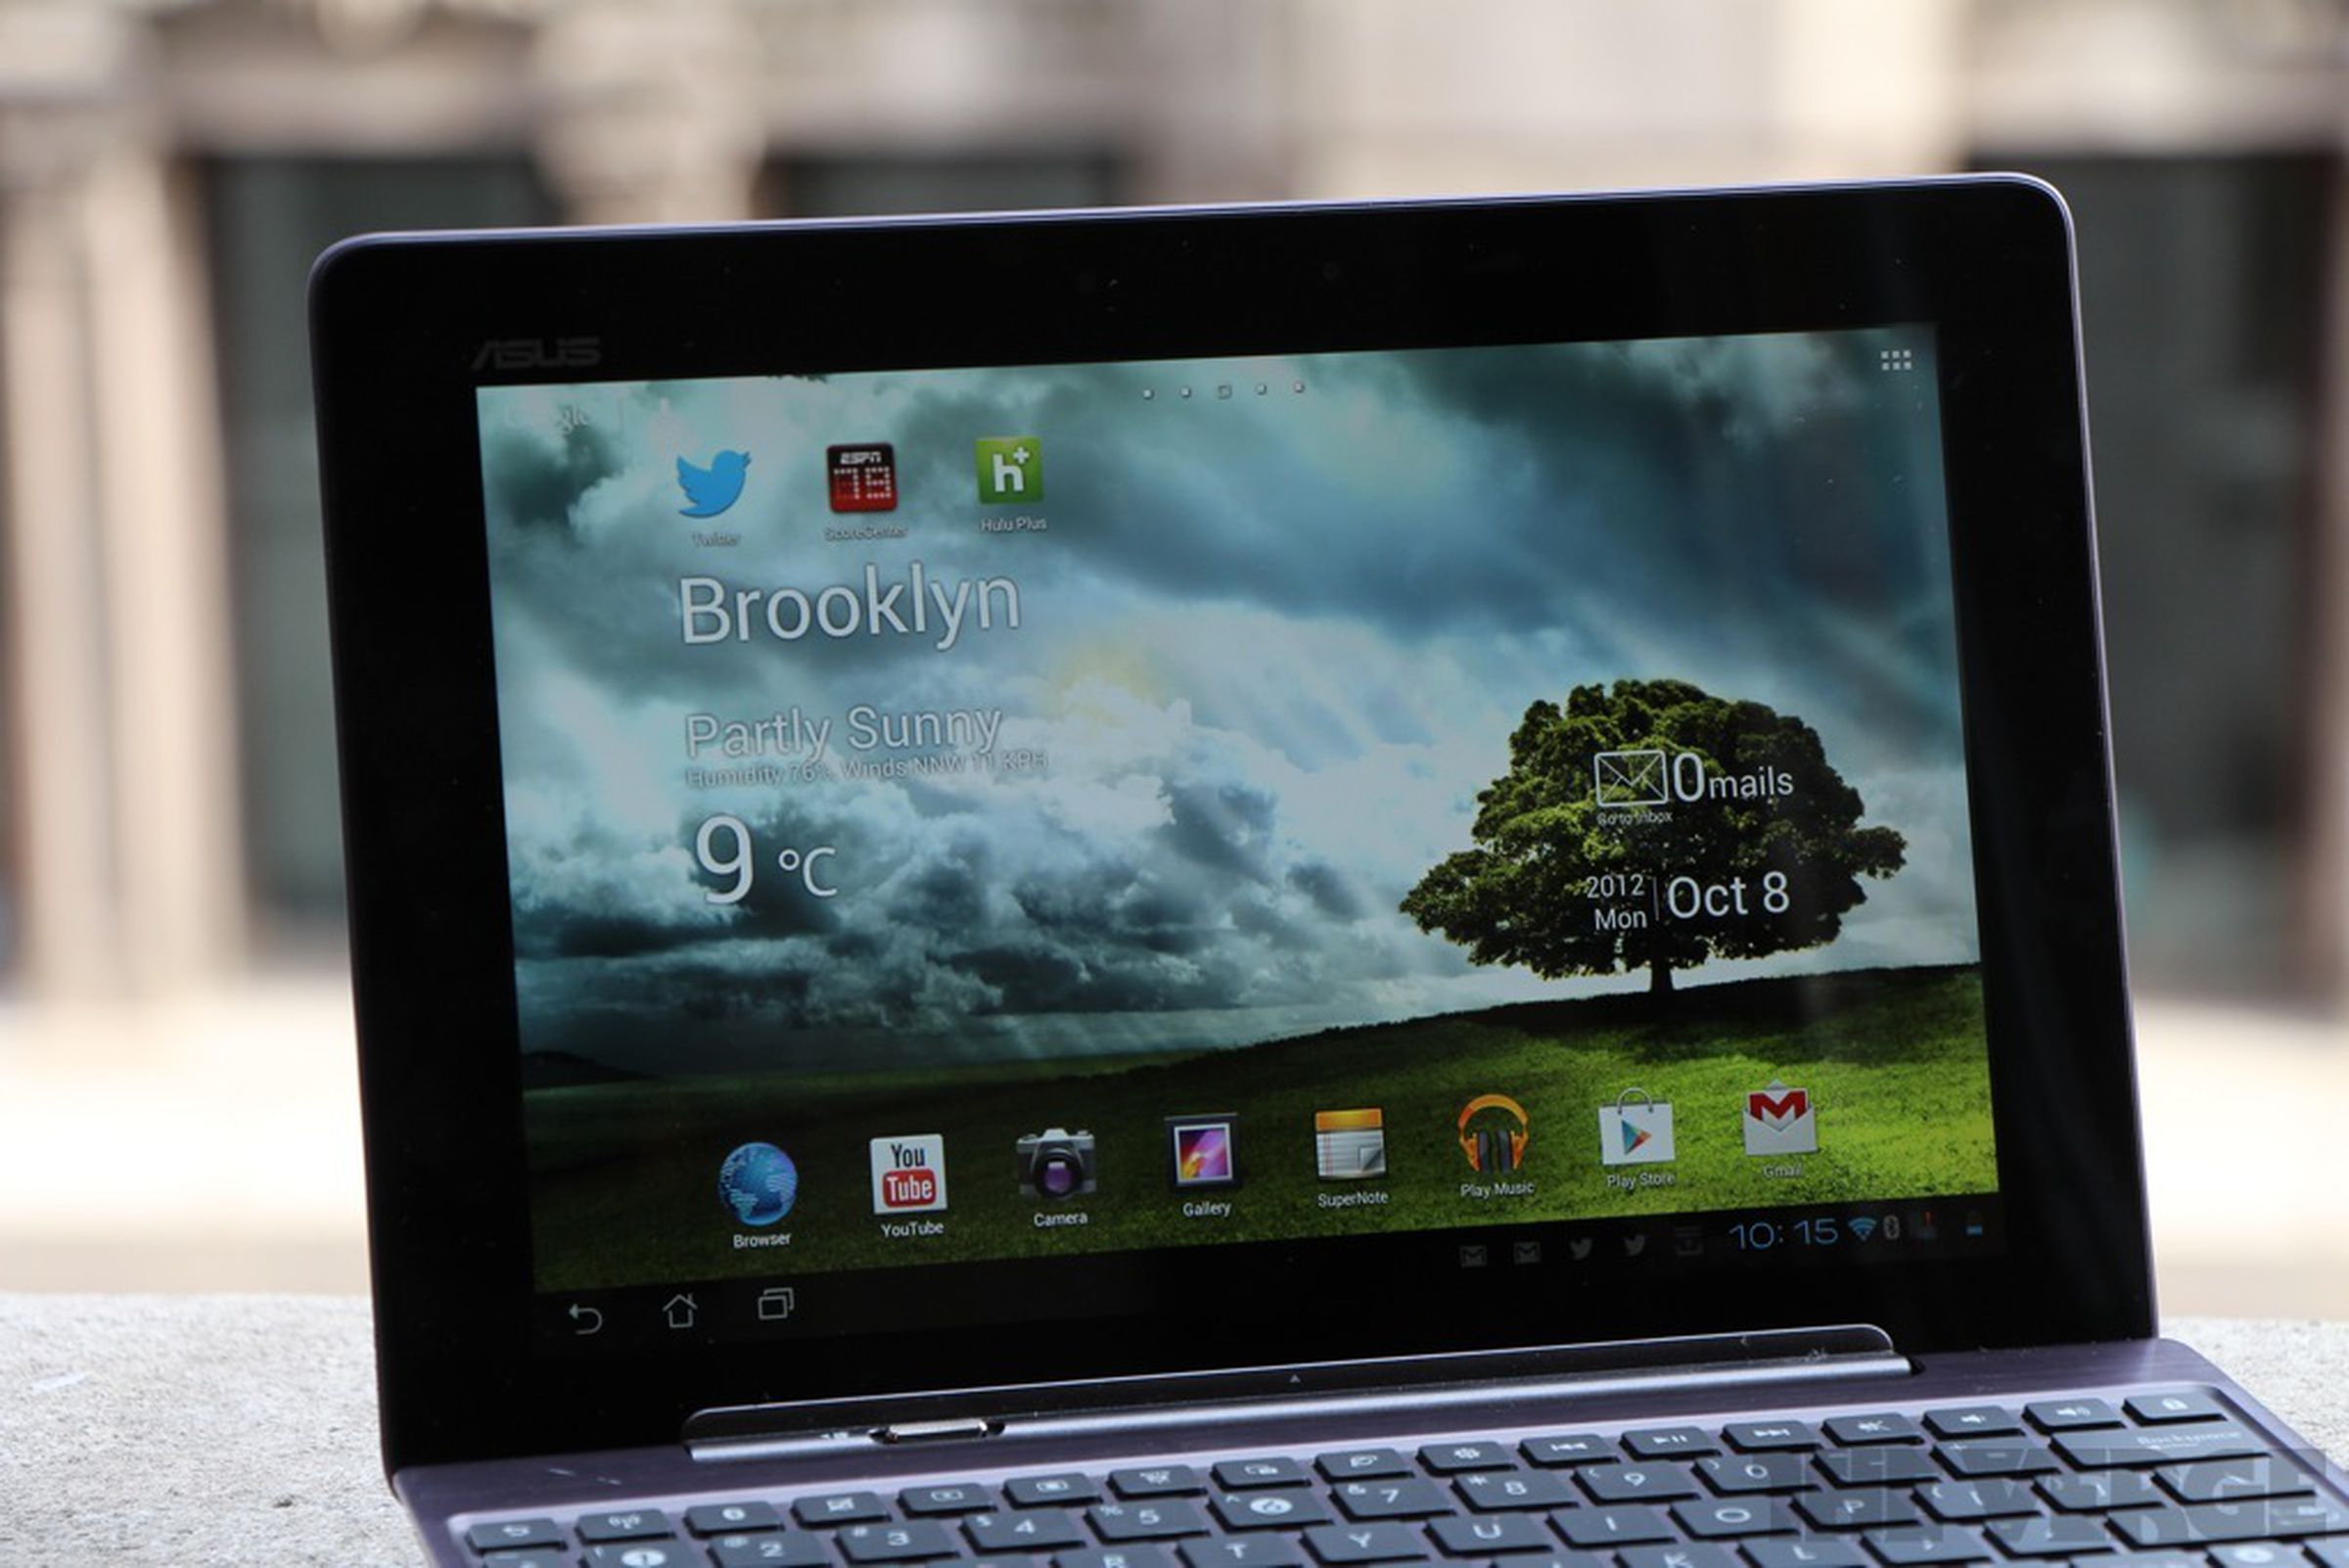 Asus Transformer Pad Infinity review pictures